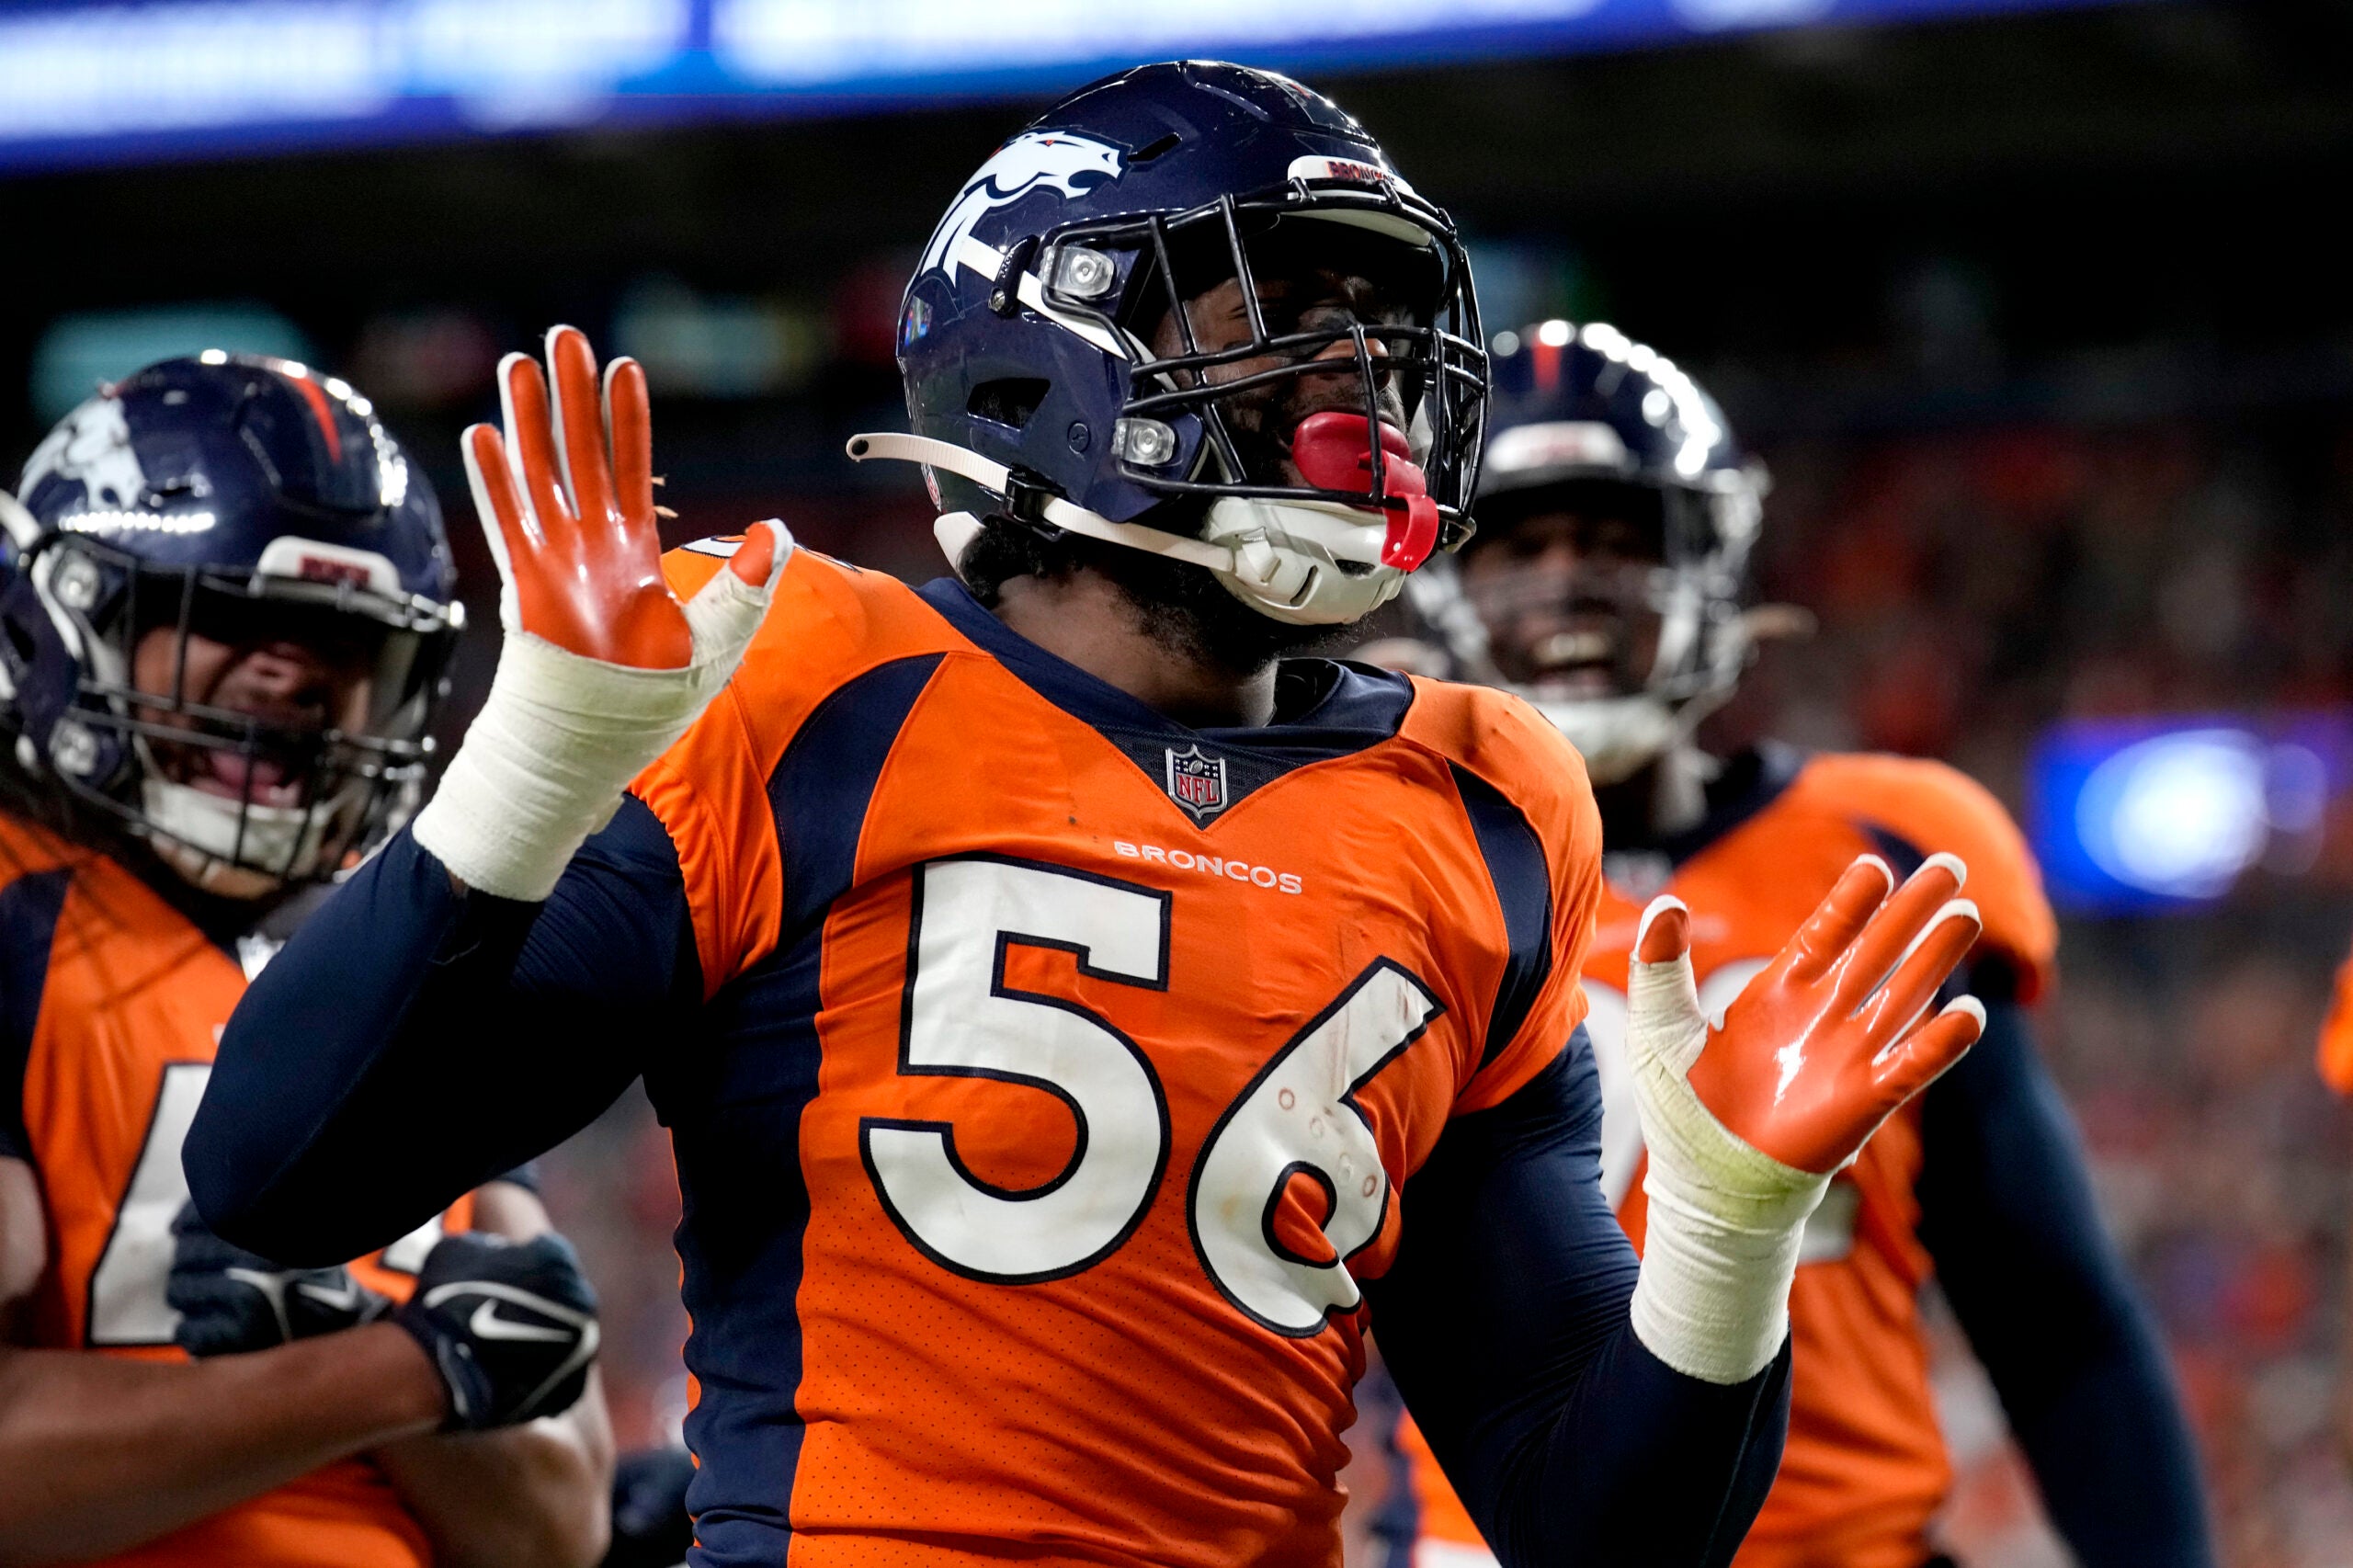 Denver Broncos linebacker Baron Browning (56) celebrates his touchdown against the Minnesota Vikings during the first half of an NFL preseason football game, Saturday, Aug. 27, 2022, in Denver.